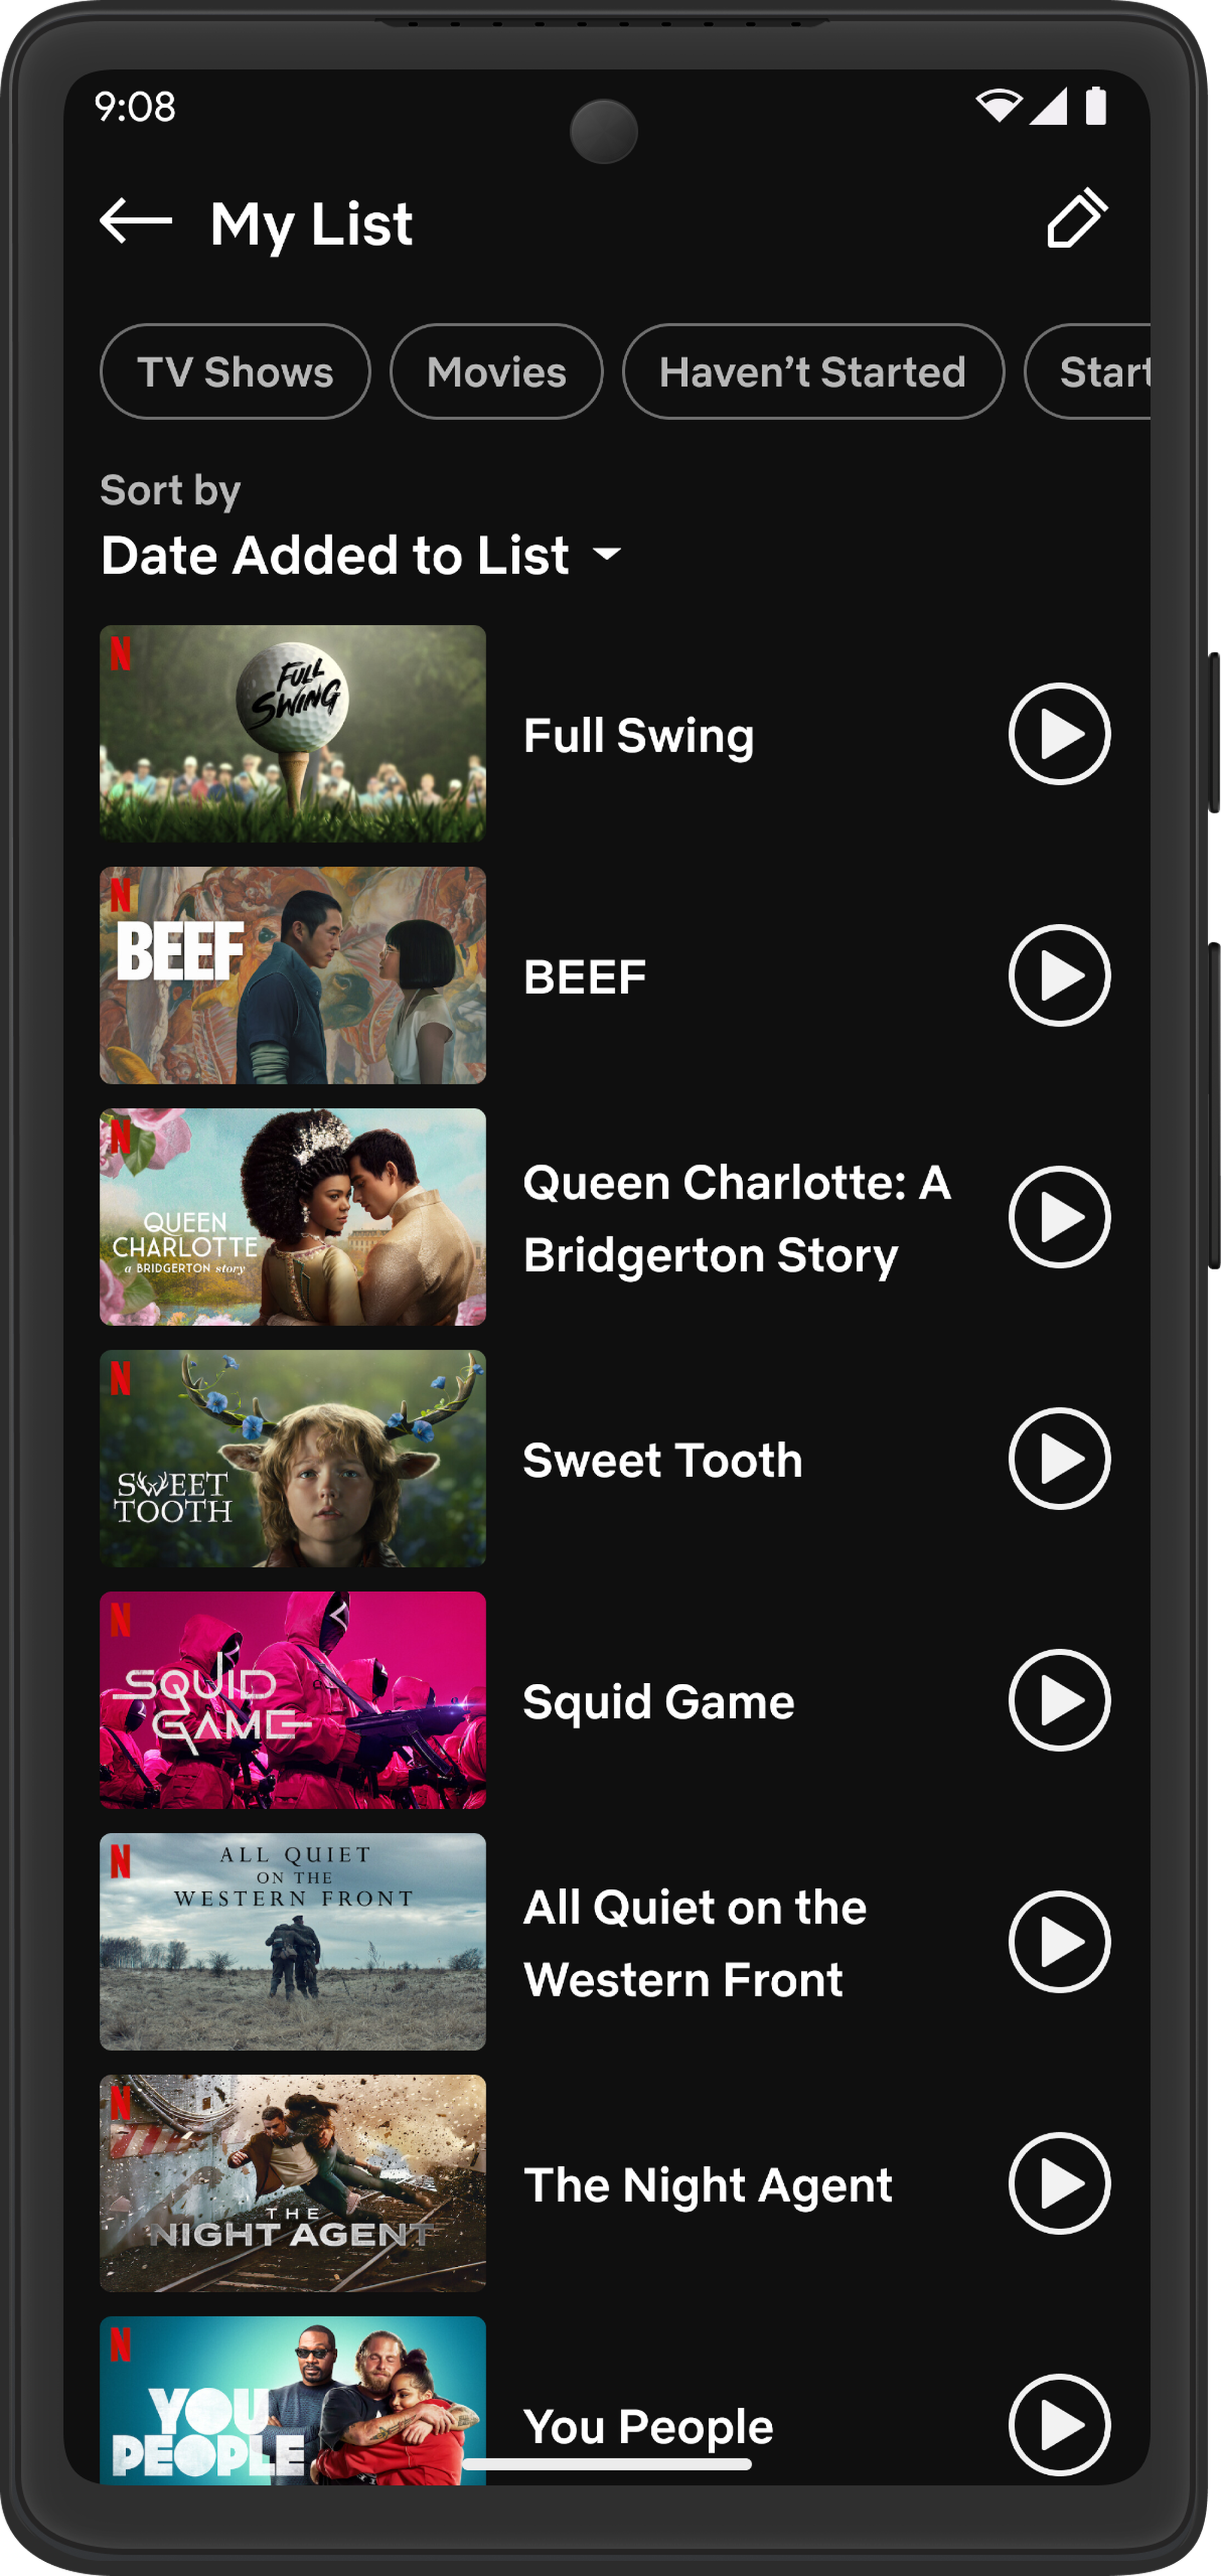 The updated “My List” view on Netflix’s Android app.